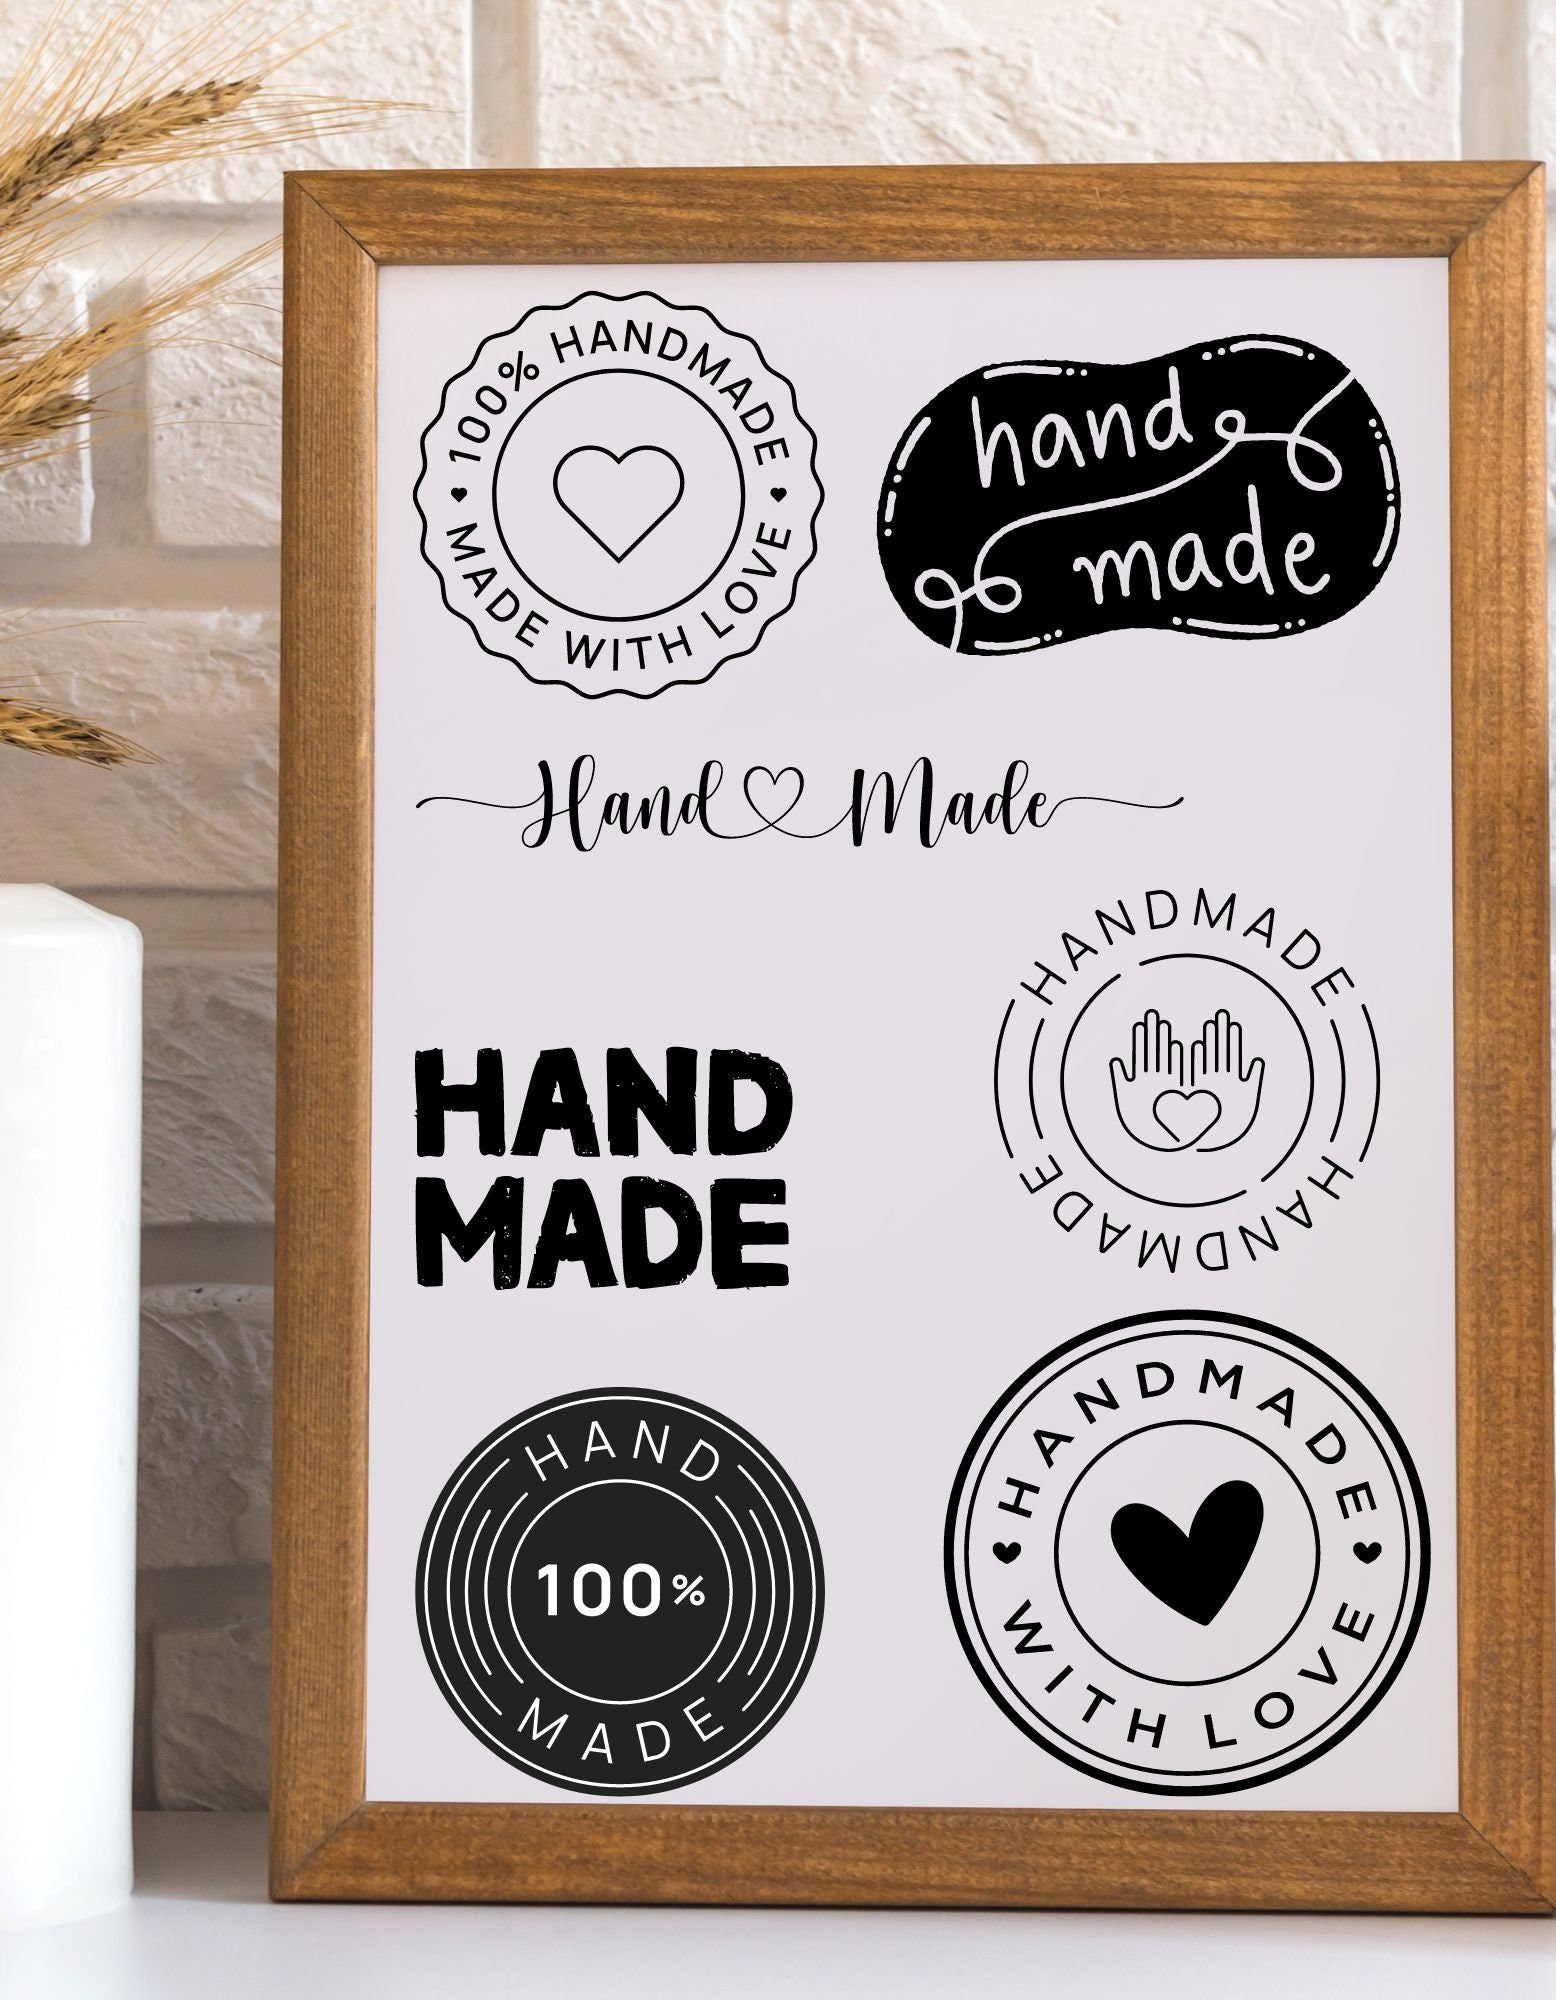 Handmade With Love Label Stickers by Recollections™